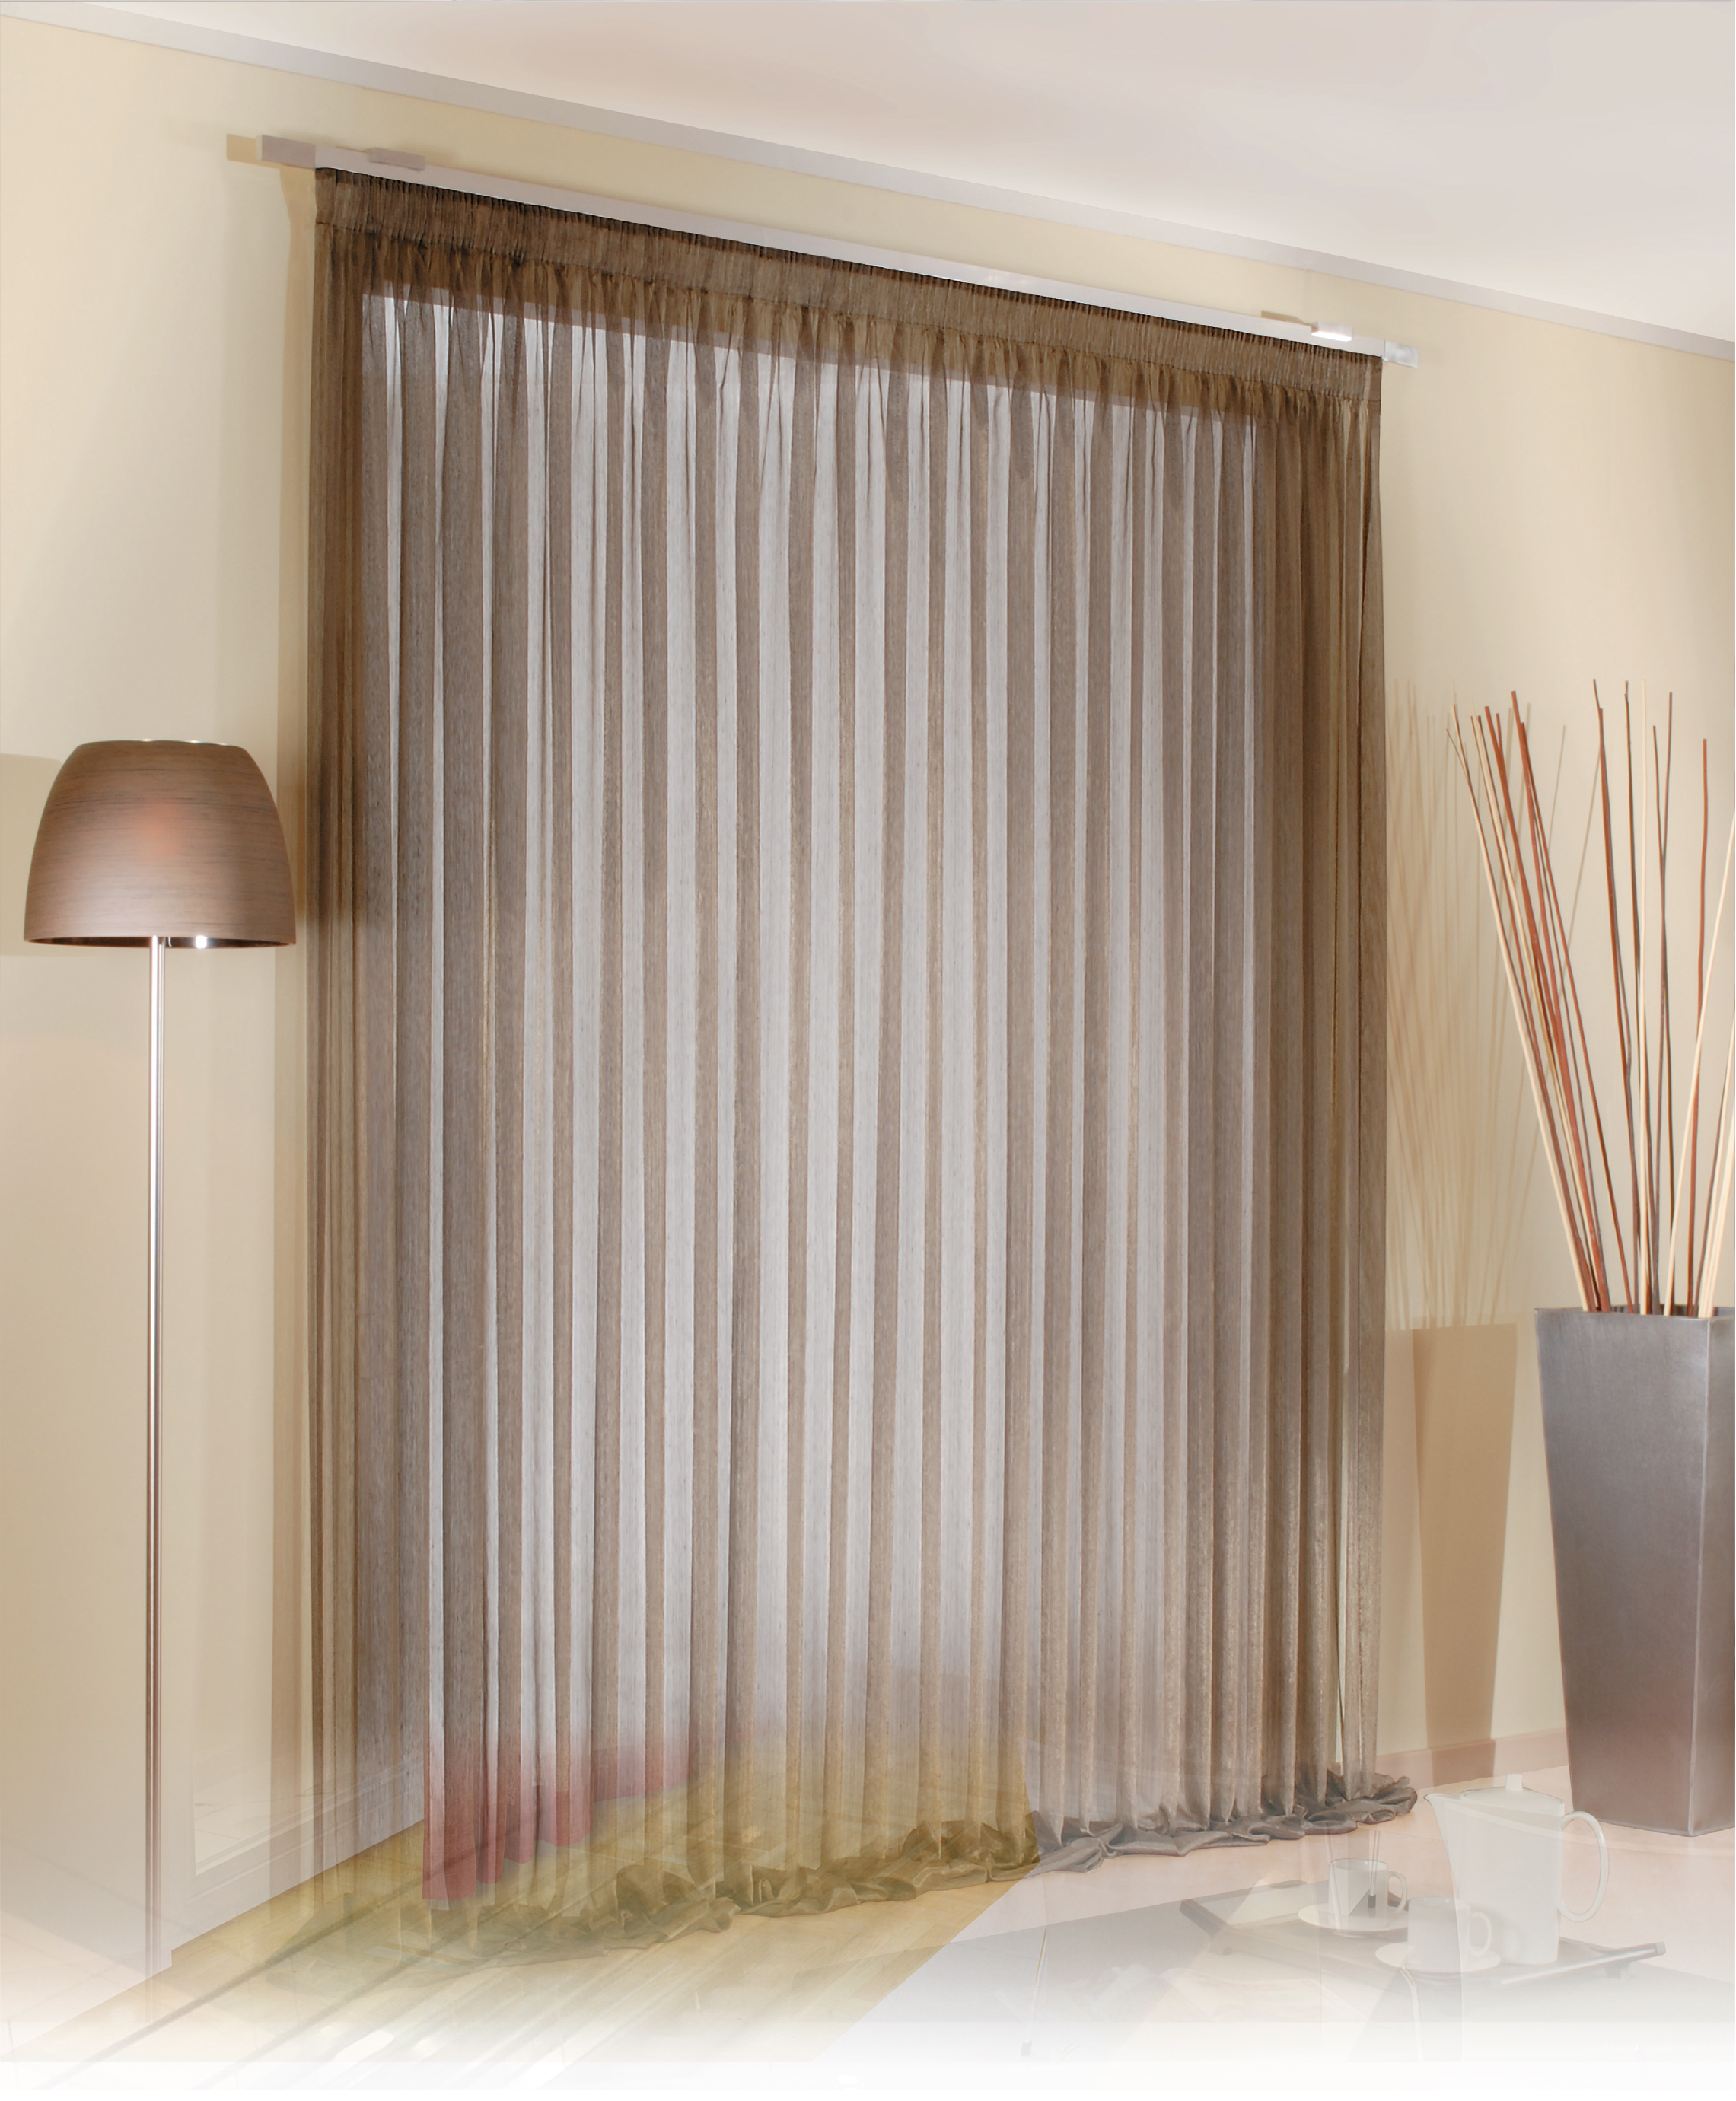 What are the key factors to be considered while buying motorized blinds?